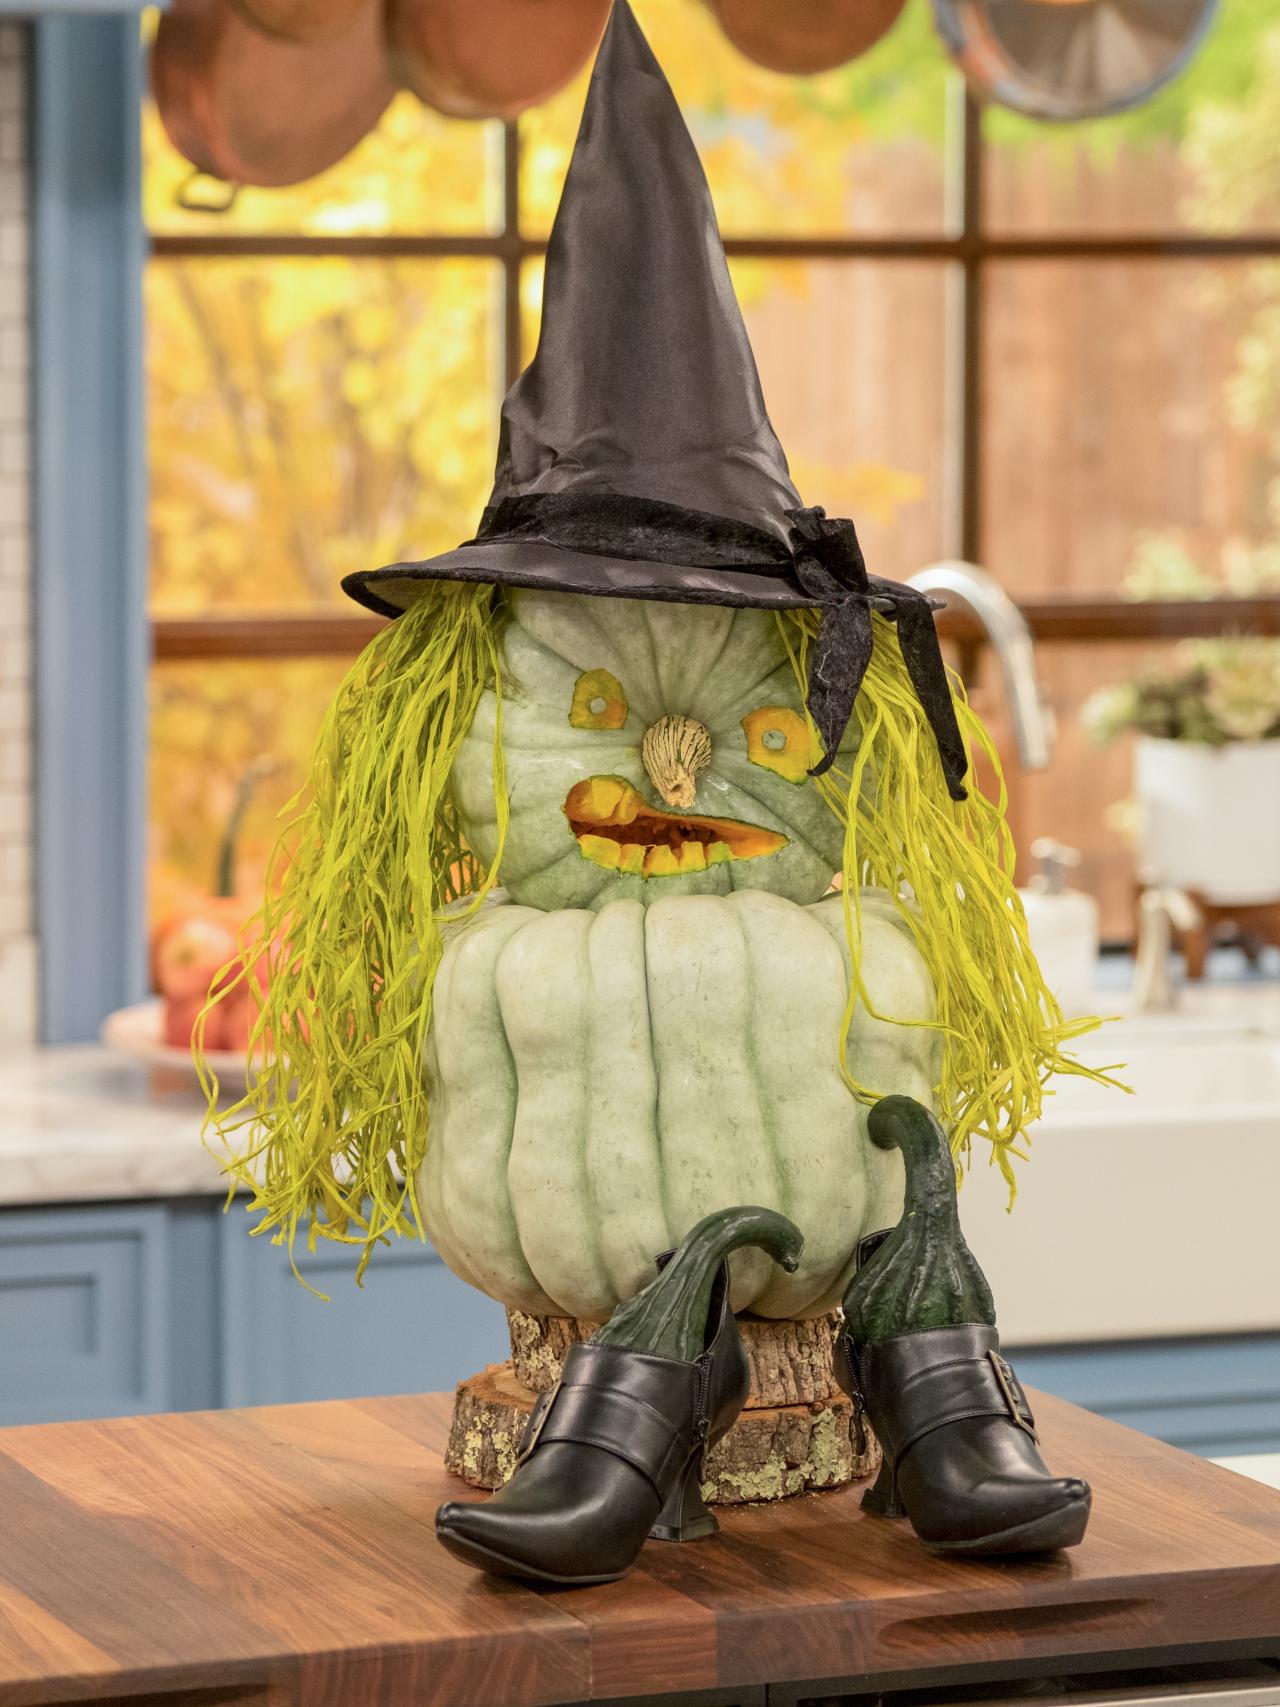 Frightening Food Crafts | The Kitchen: Food Network | Food Network